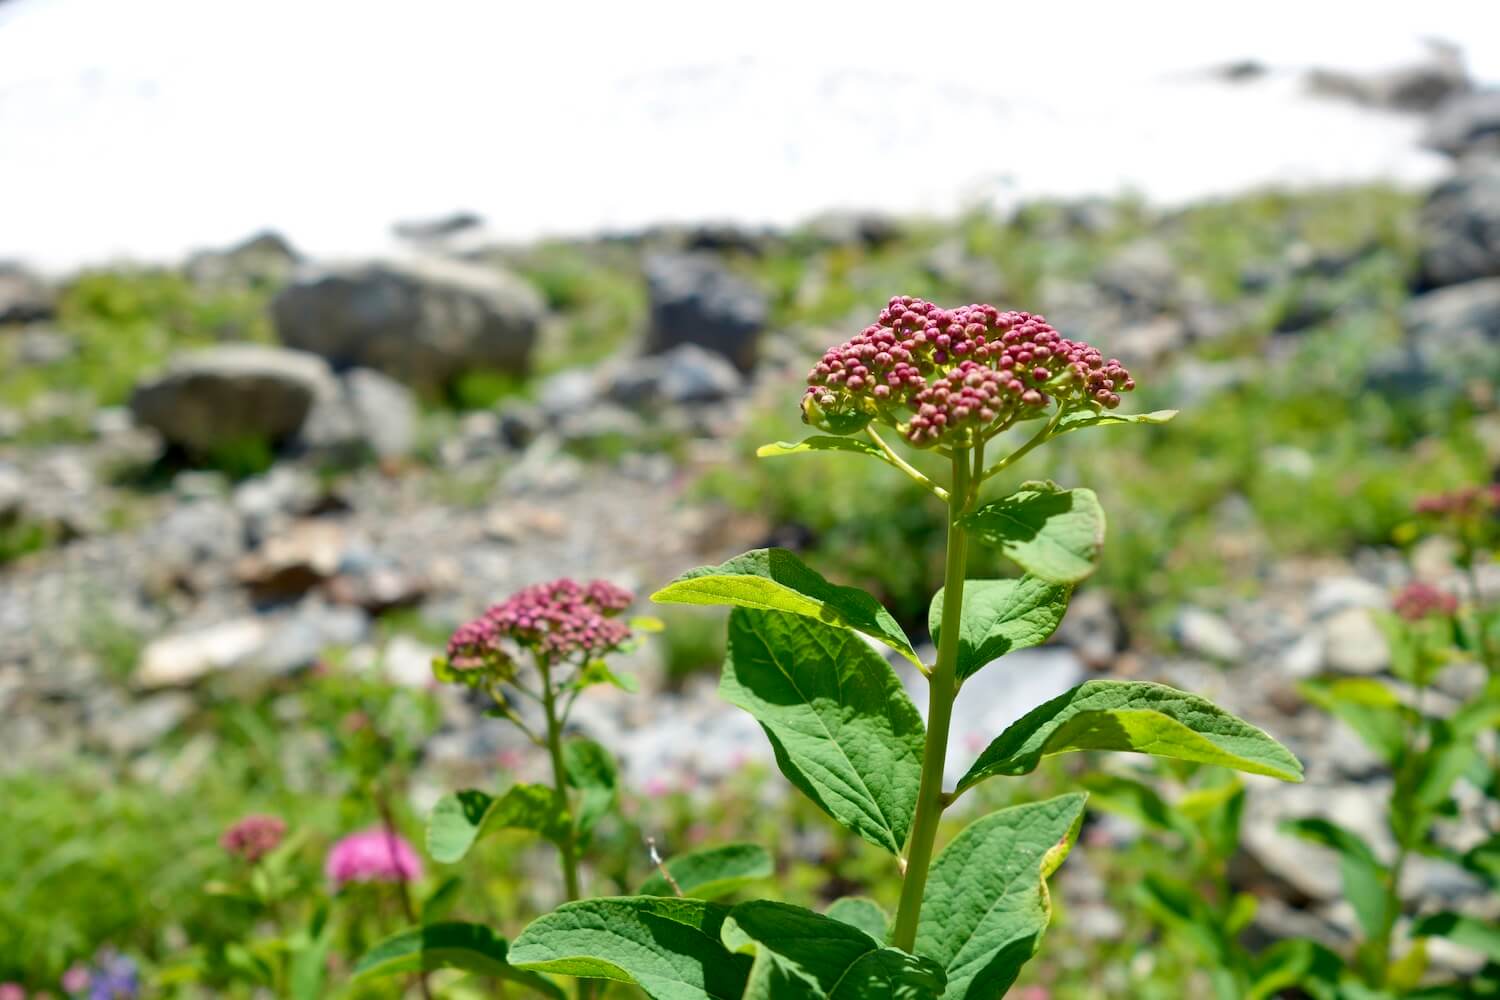 An alpine flower at Big Four Ice Caves prepares to flower with tight purple buds atop a leafy green plant. In the background and out of focus is the snow and ice field.